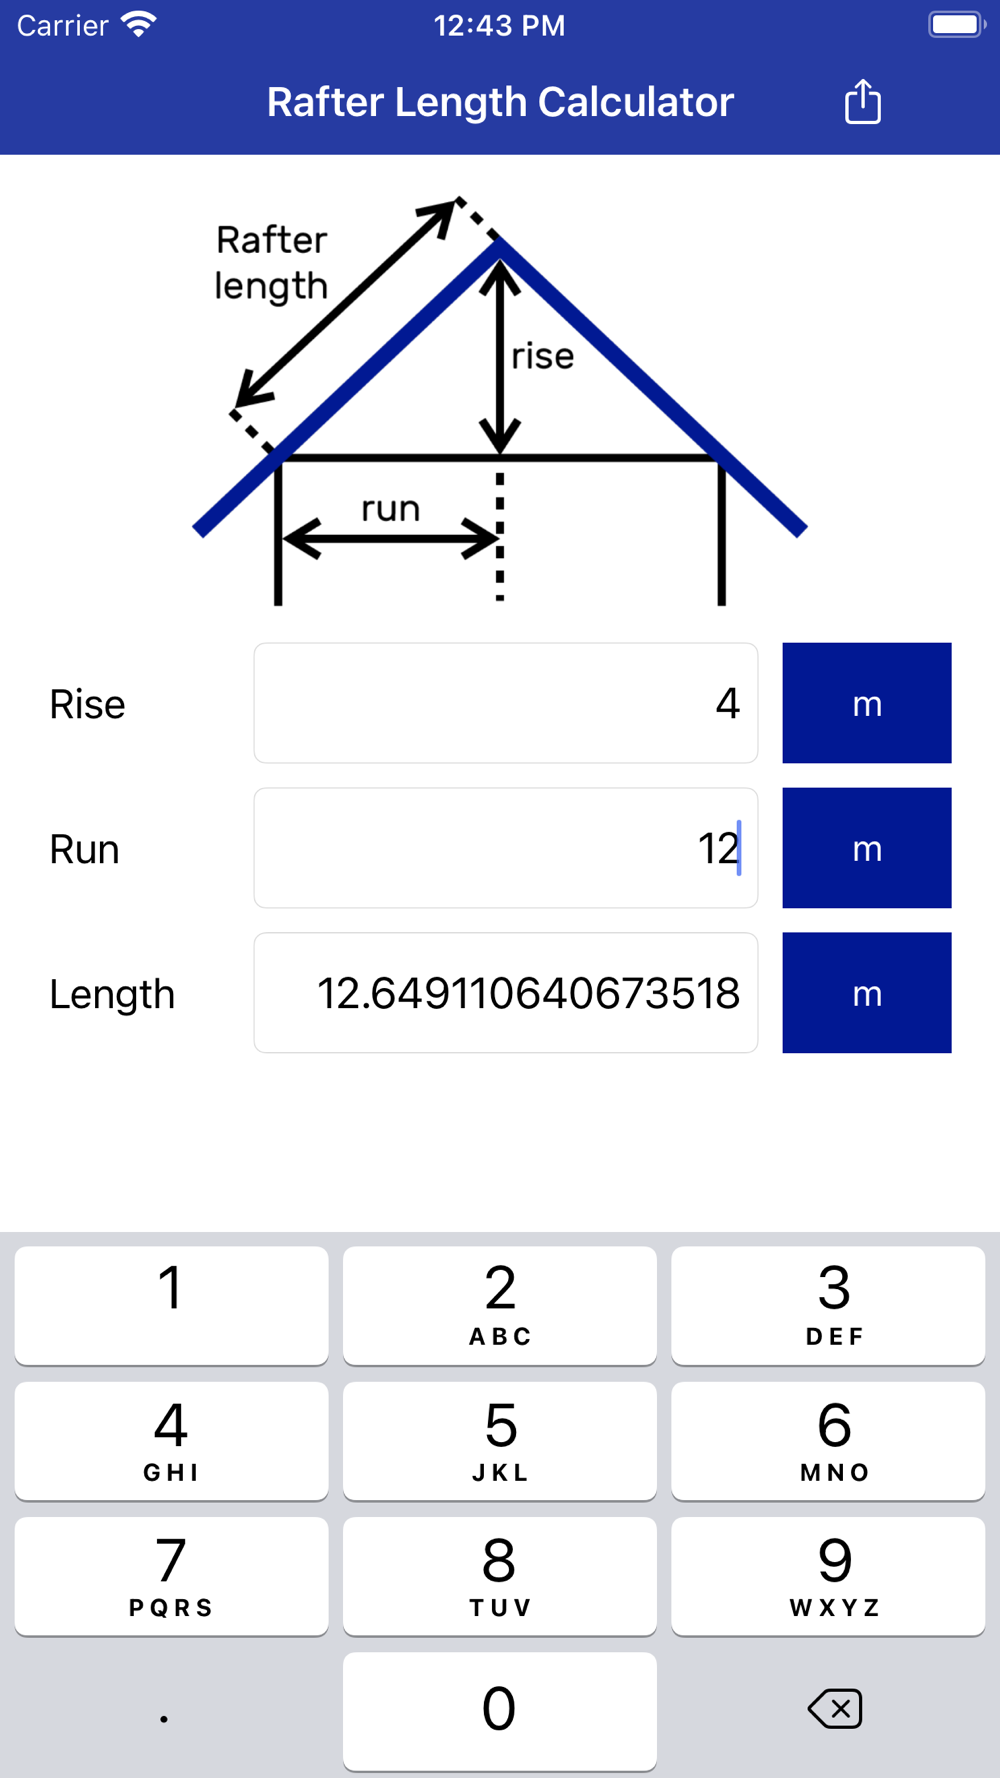 Rafter Length Calculator Download App for iPhone